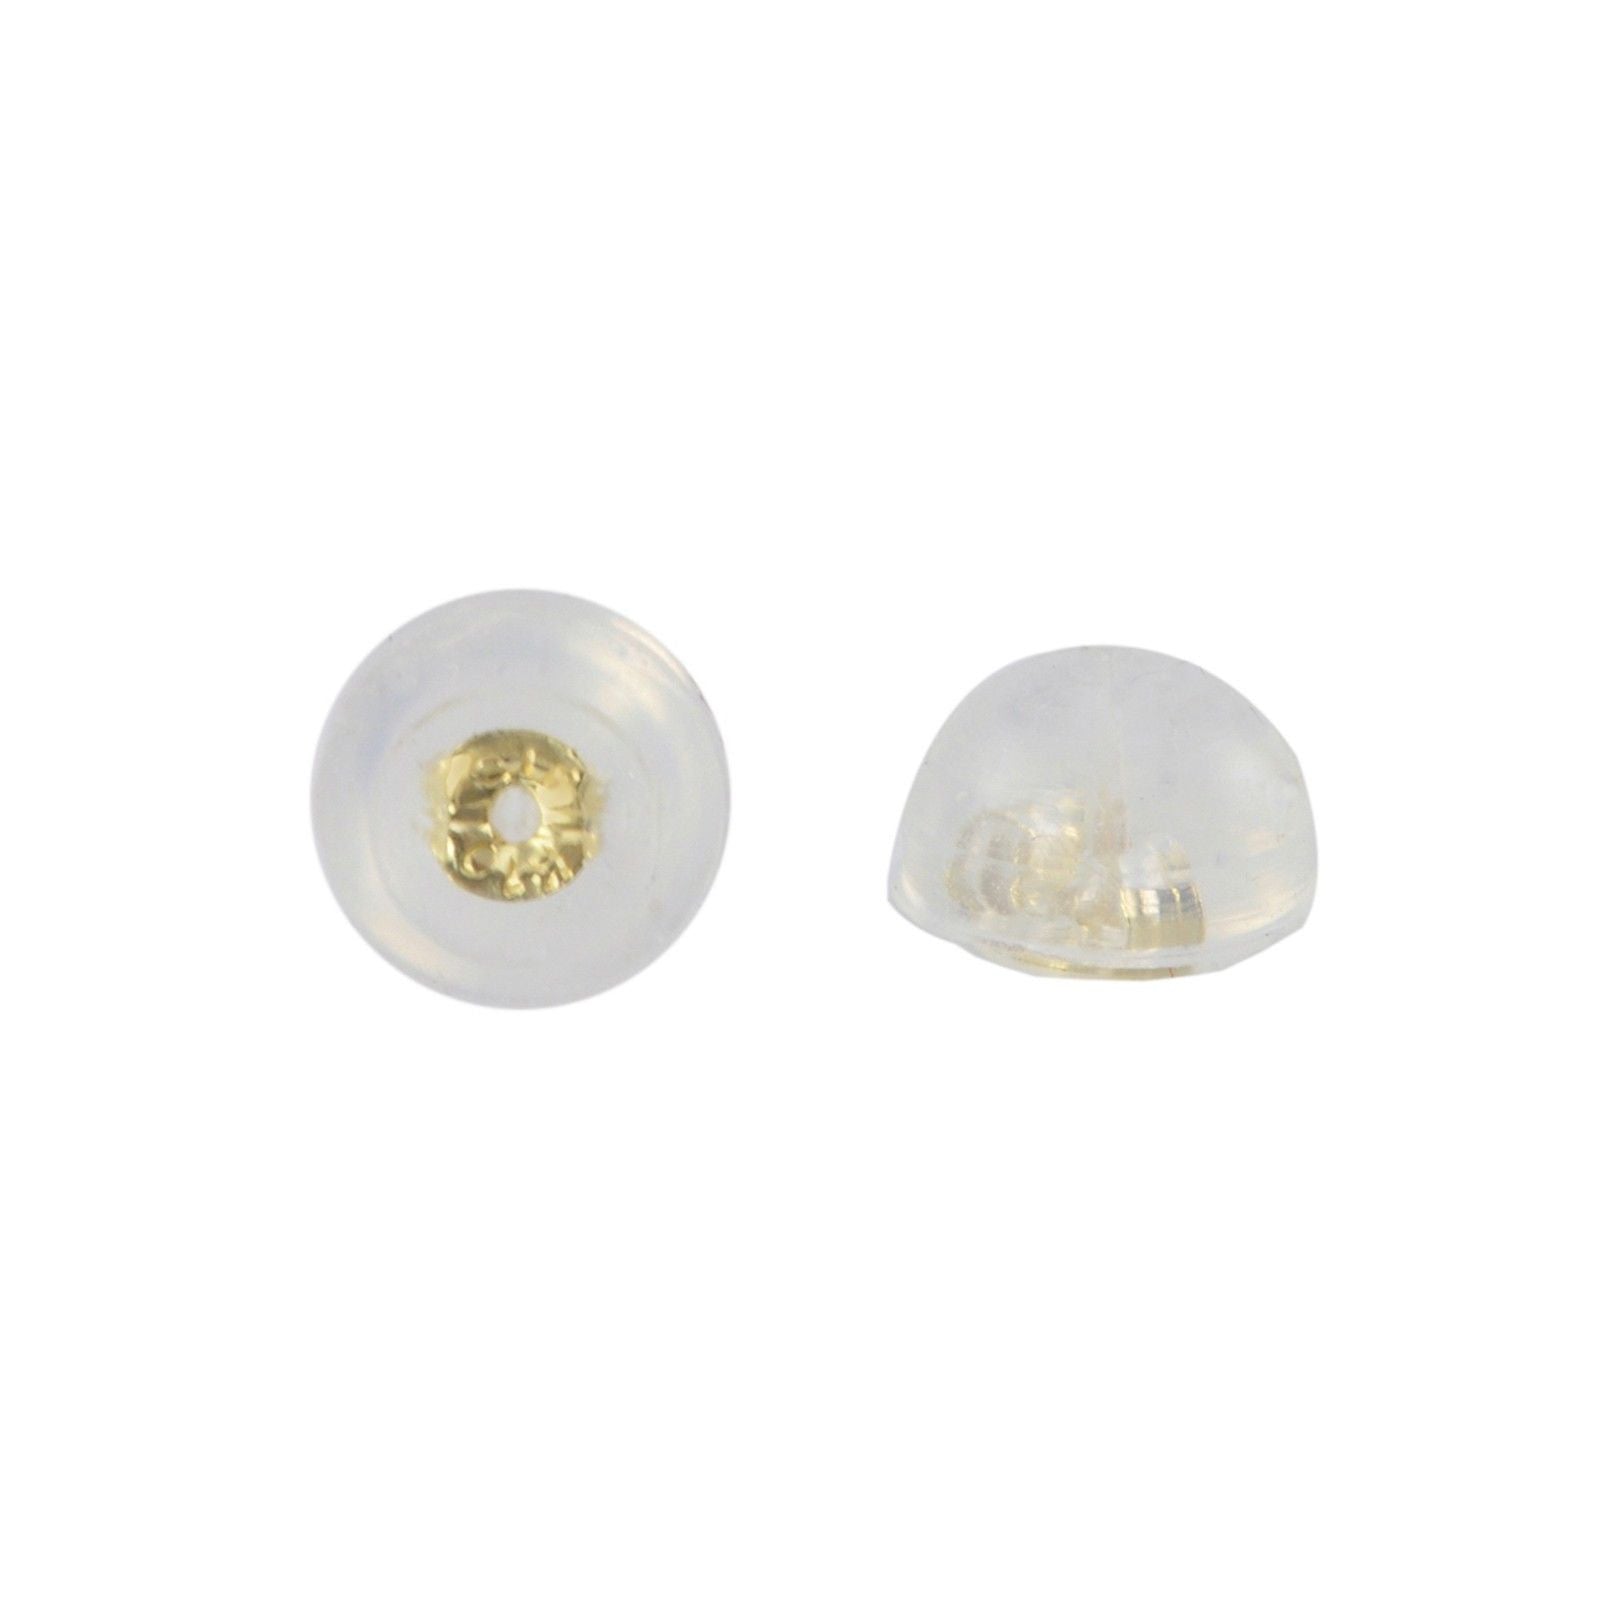 Silicone Earring Backs Clutches 10k Yellow Gold Inserts Screw back